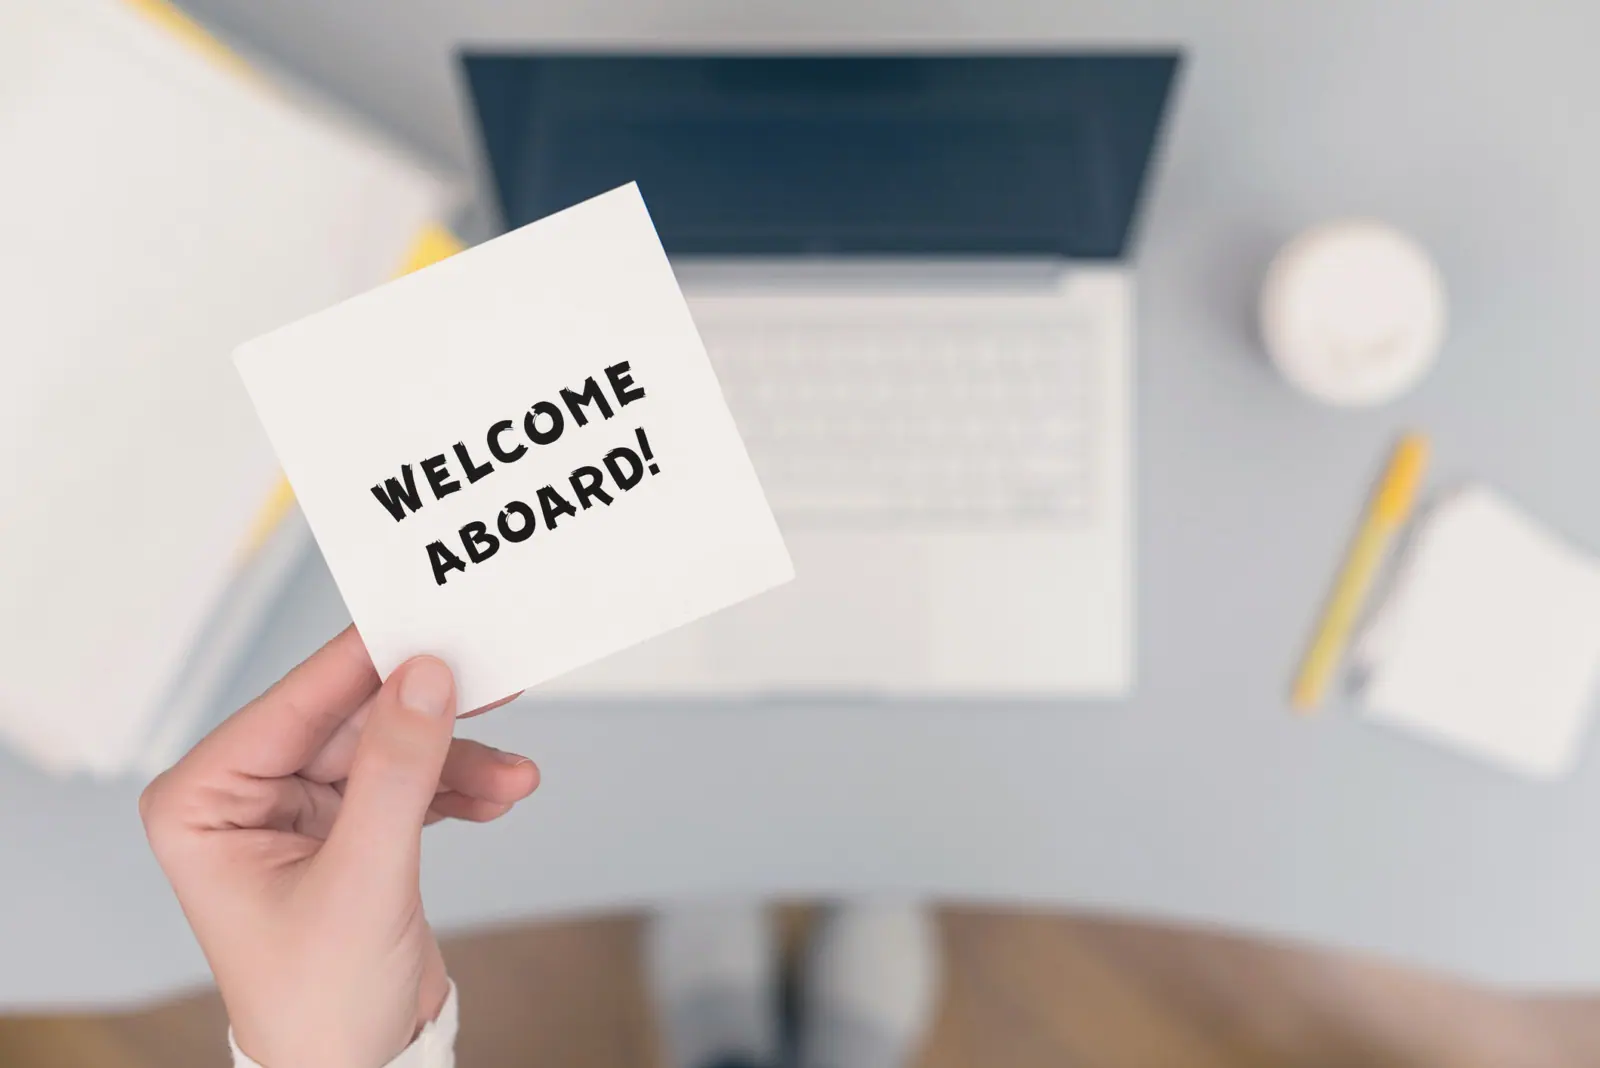 New-Hire Orientation Ideas: 7 Tried-and-True Onboarding Strategies